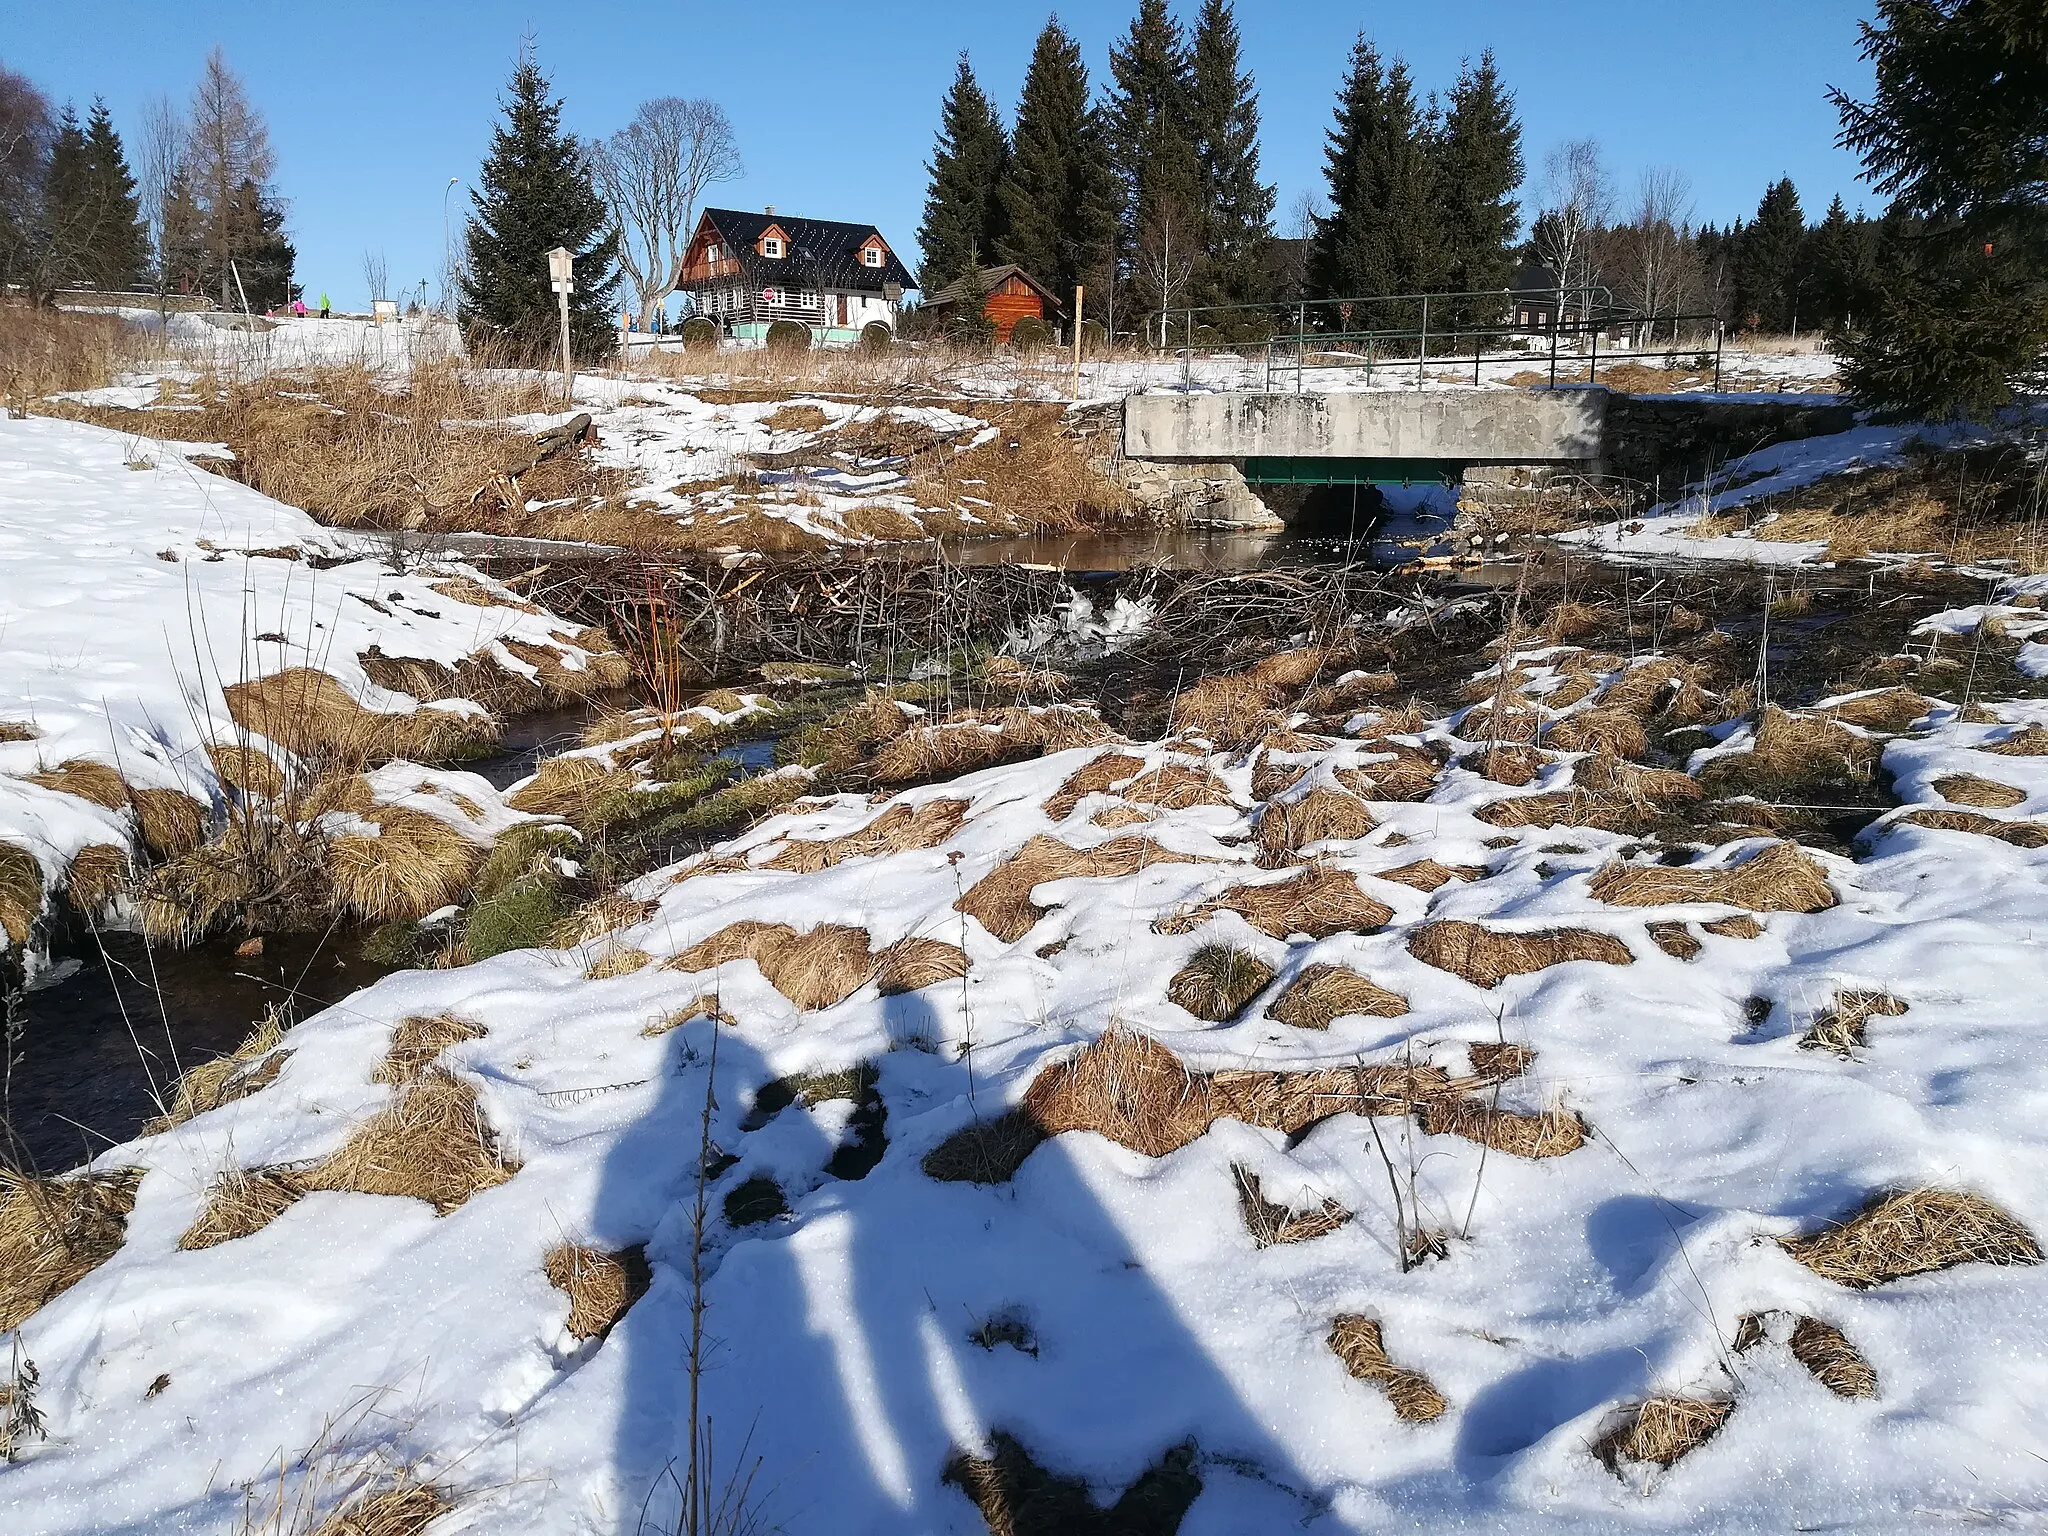 Photo showing: The brook „Filipohuťský potok“ in the Šumava Mts., Czech republic. The beaver dam is clearly visible in the foreground. January 2020.